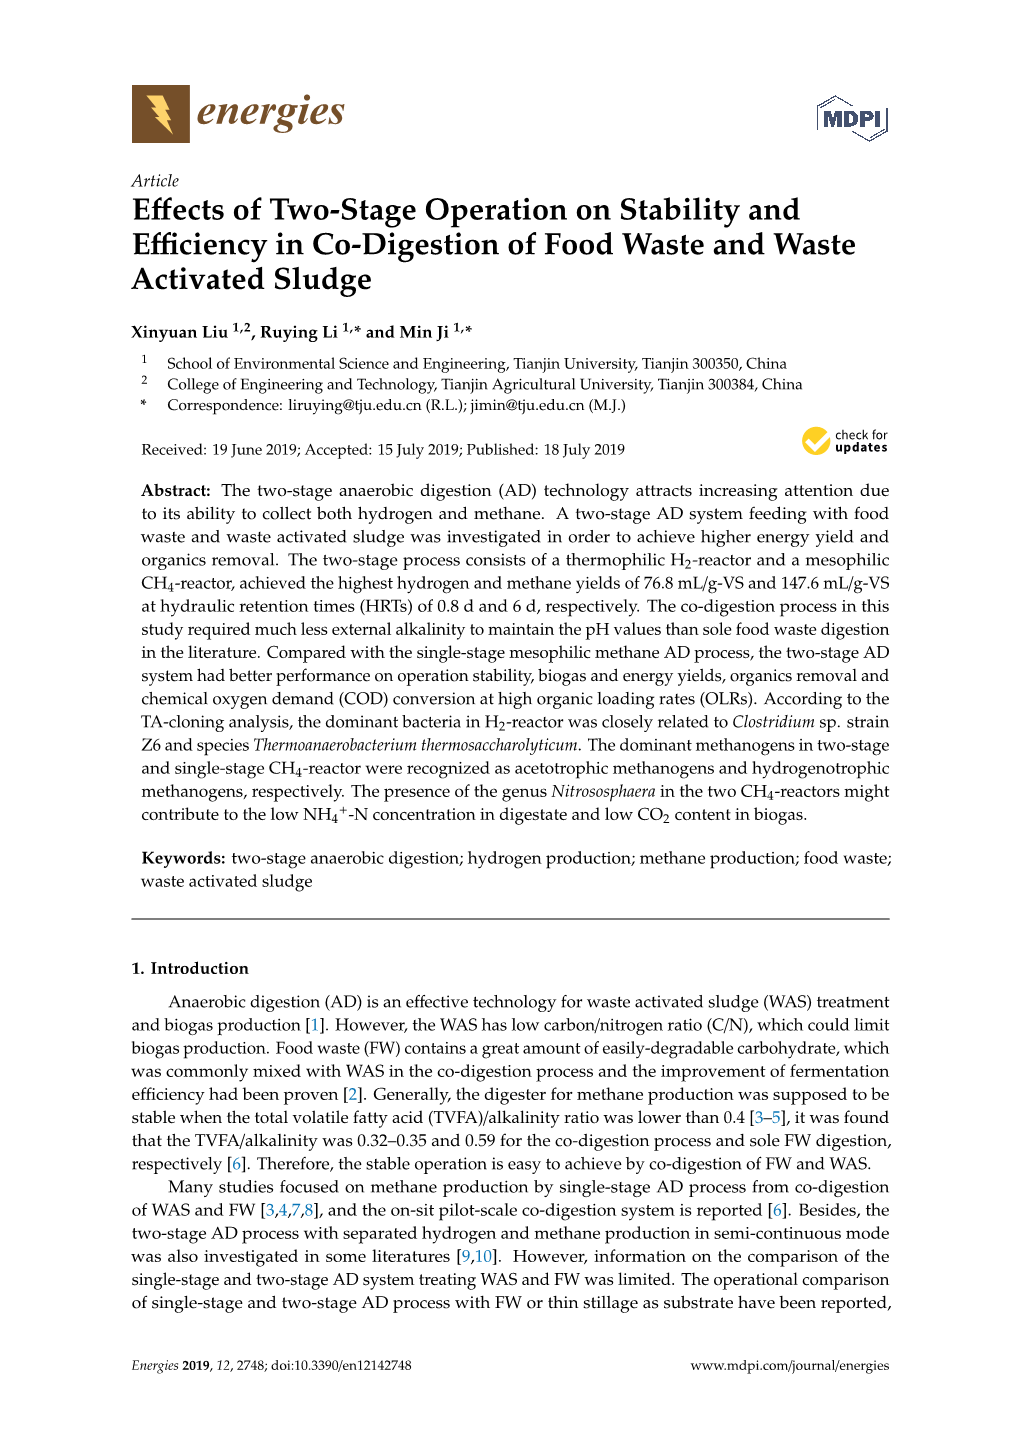 Effects of Two-Stage Operation on Stability and Efficiency in Co-Digestion of Food Waste and Waste Activated Sludge